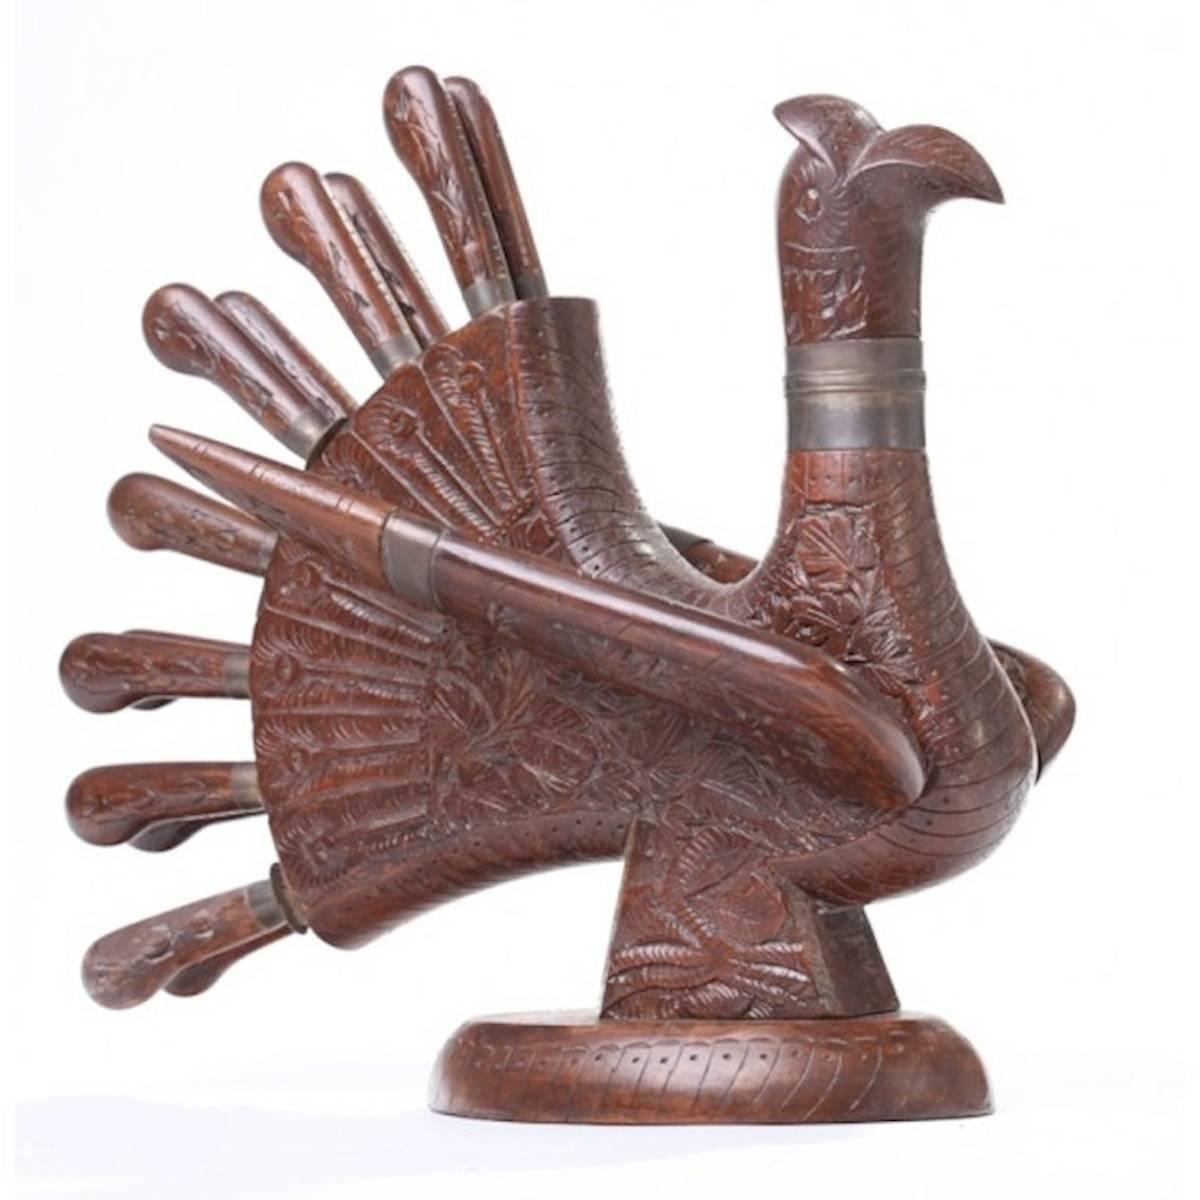 Midcentury intricately carved wooden figural turkey carving set of mahogany with decorative brass adornments, circa 1940s-1950s.
 